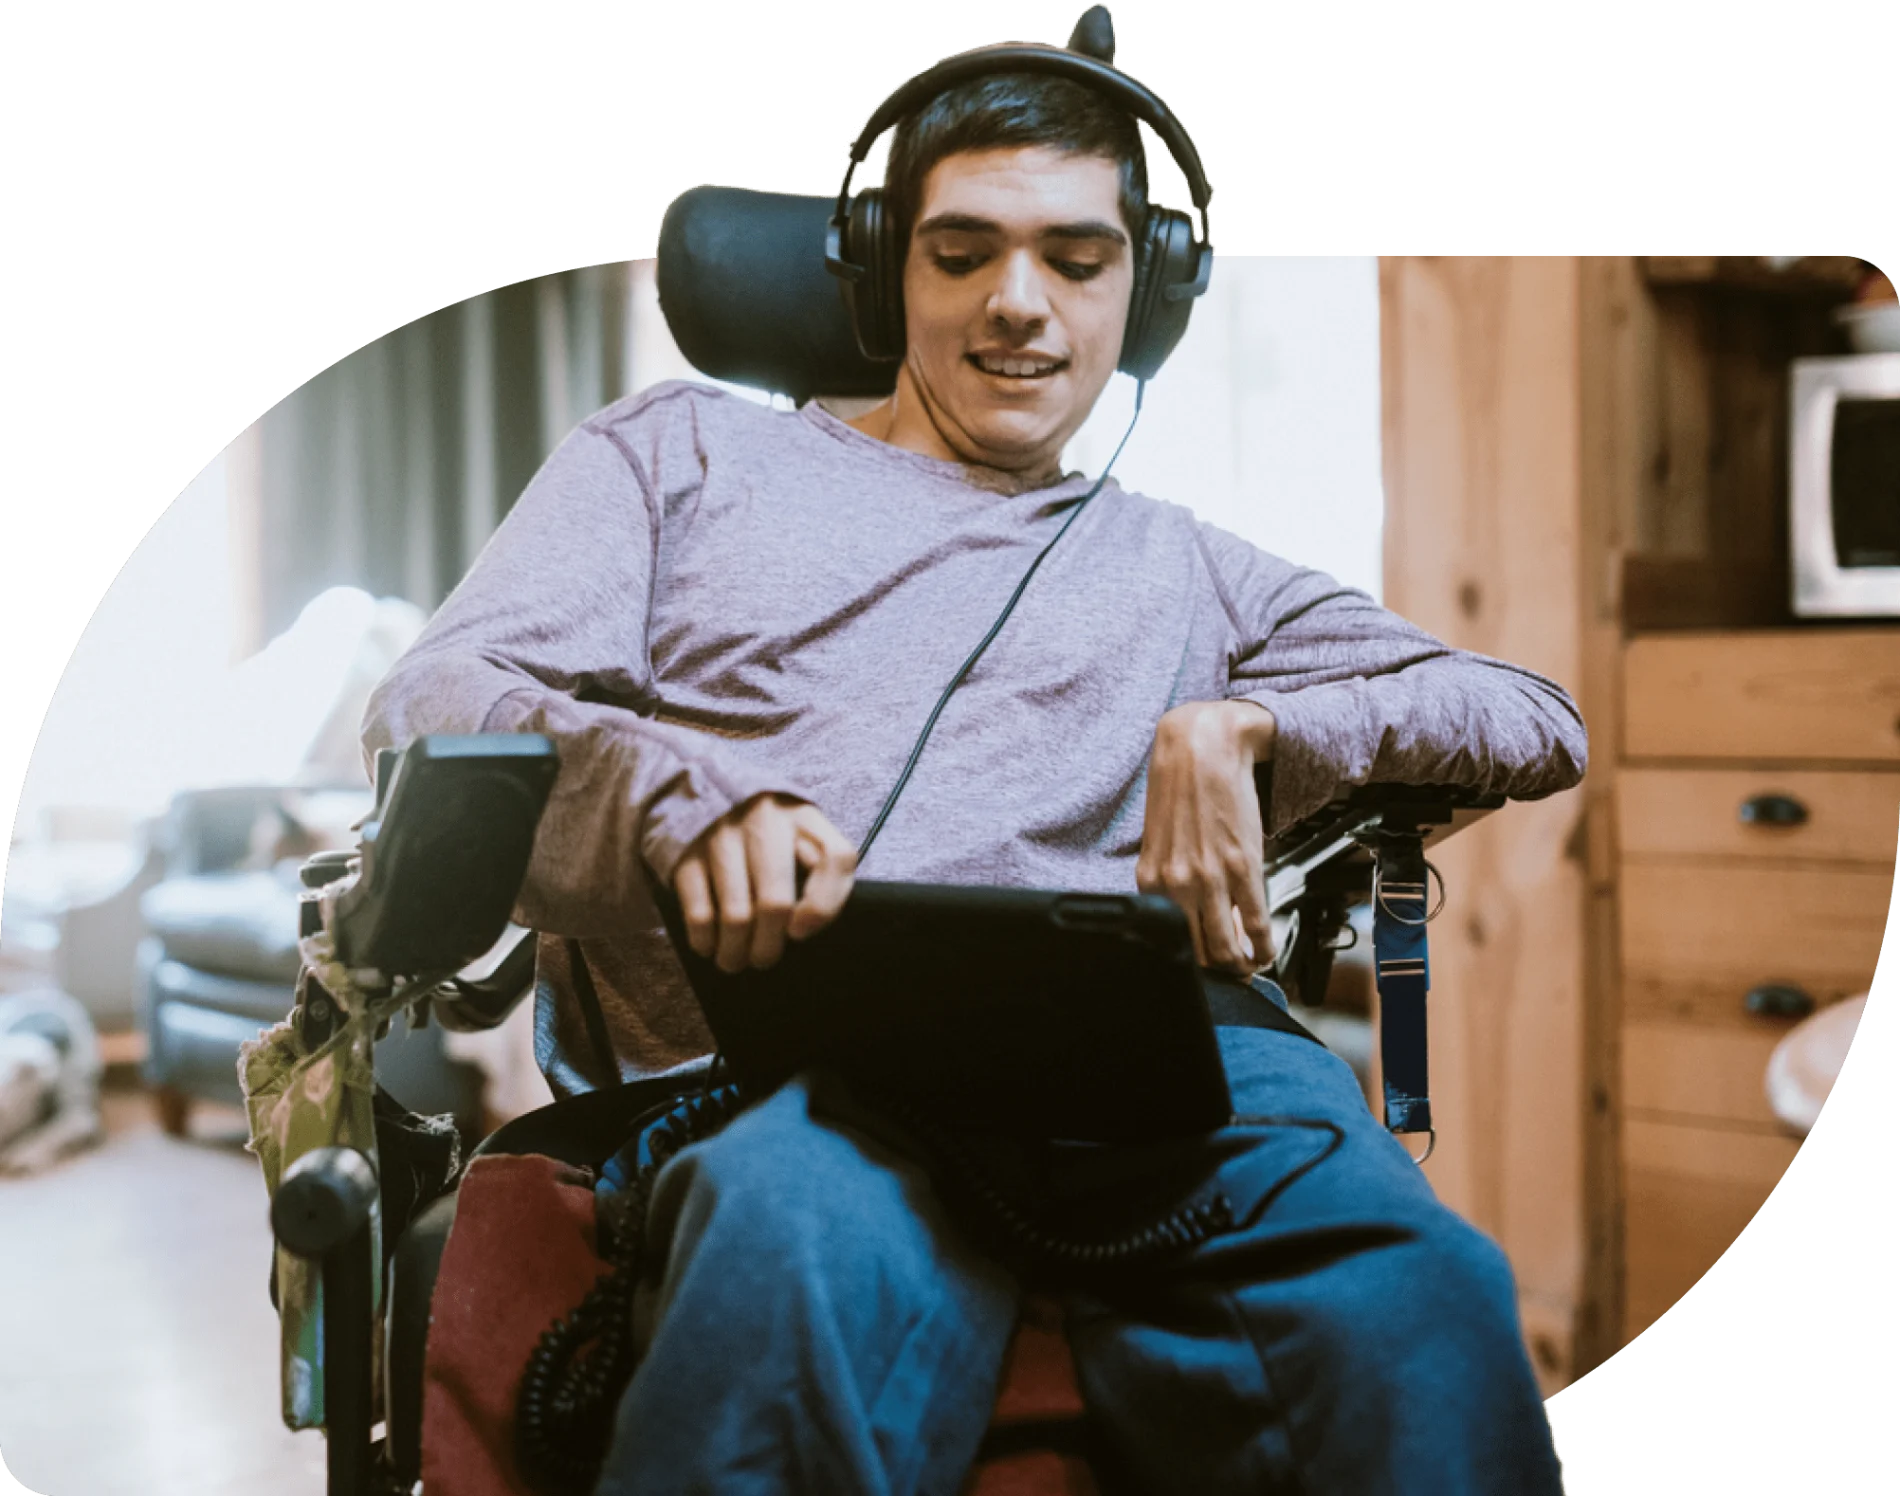 5 Tech Gadgets to Help People With Disabilities